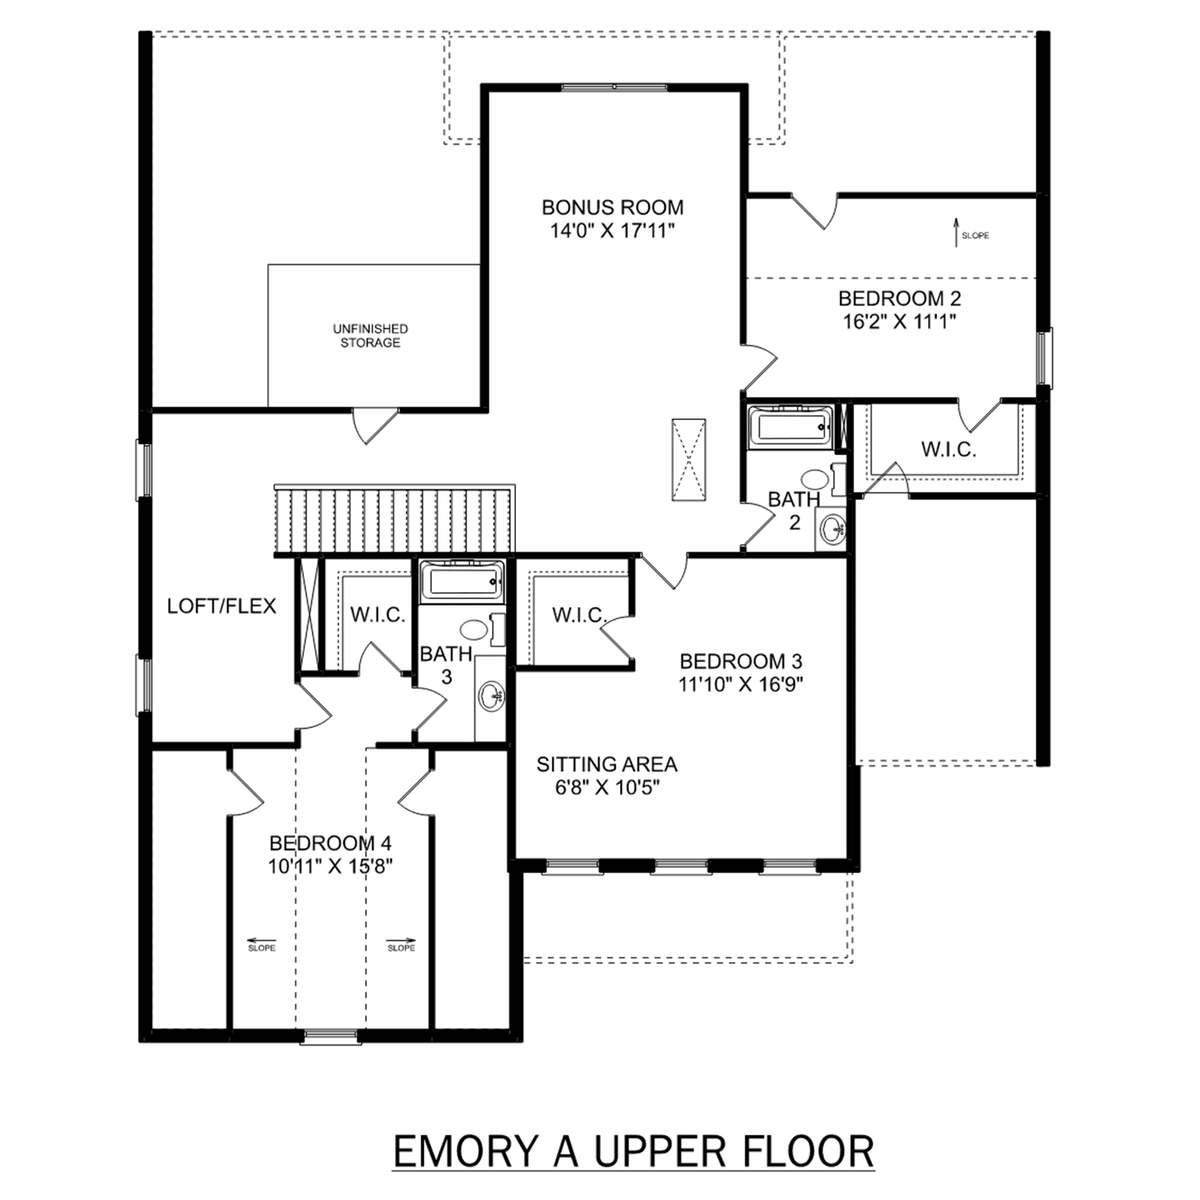 2 - The Emory floor plan layout for 7106 Hickory Cove Way in Davidson Homes' Mountain Preserve community.